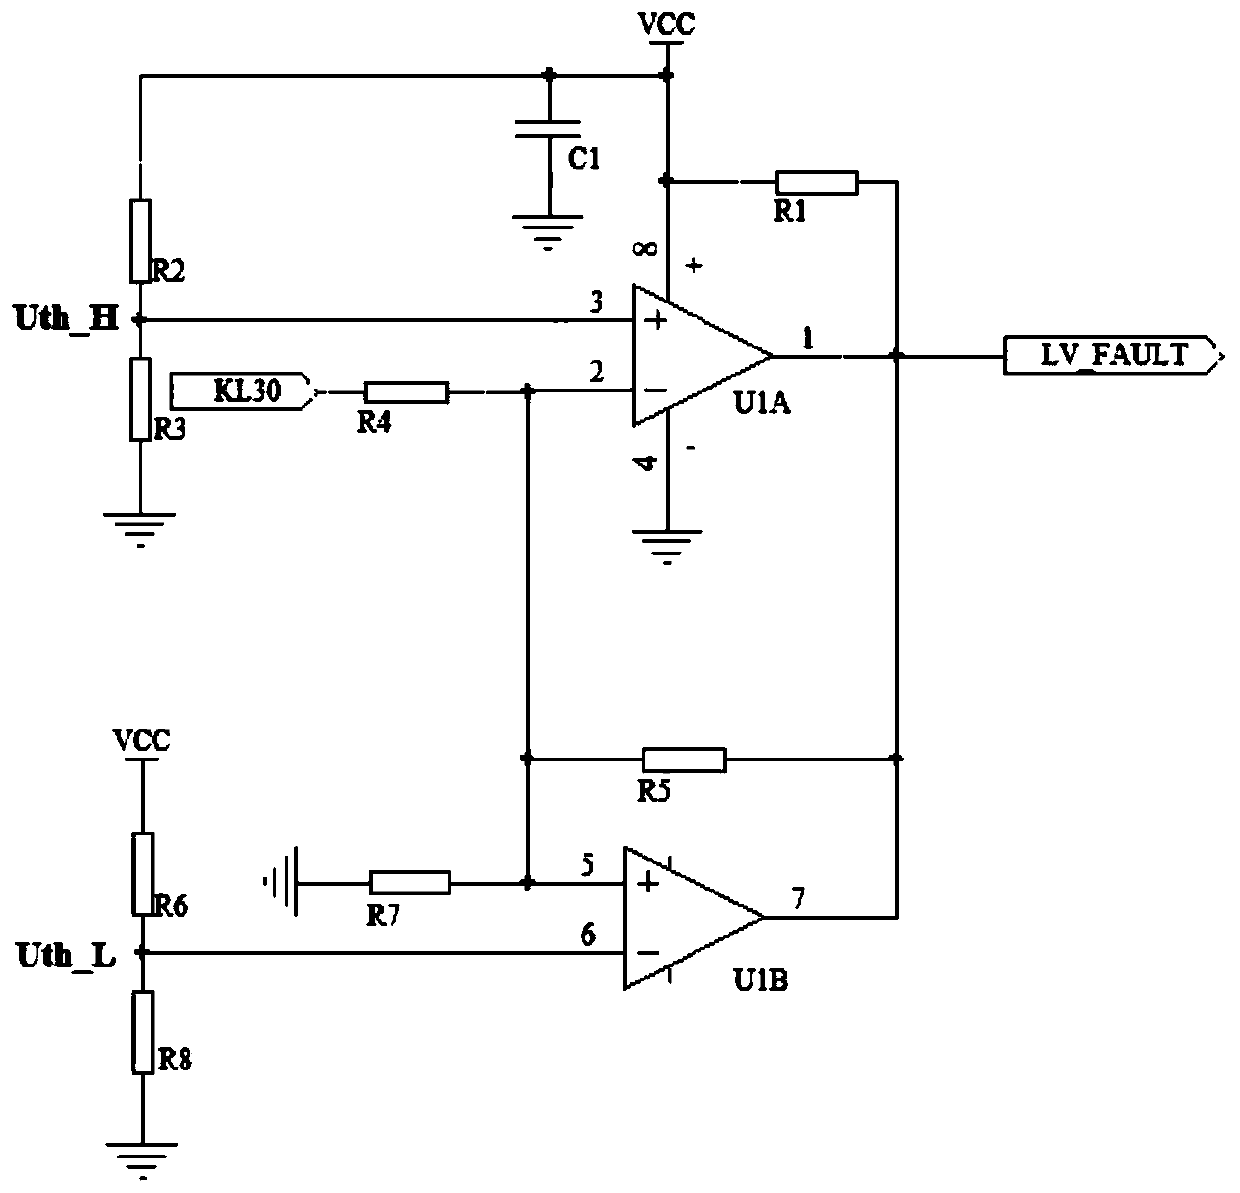 Power supply anti-backflow system of motor controller